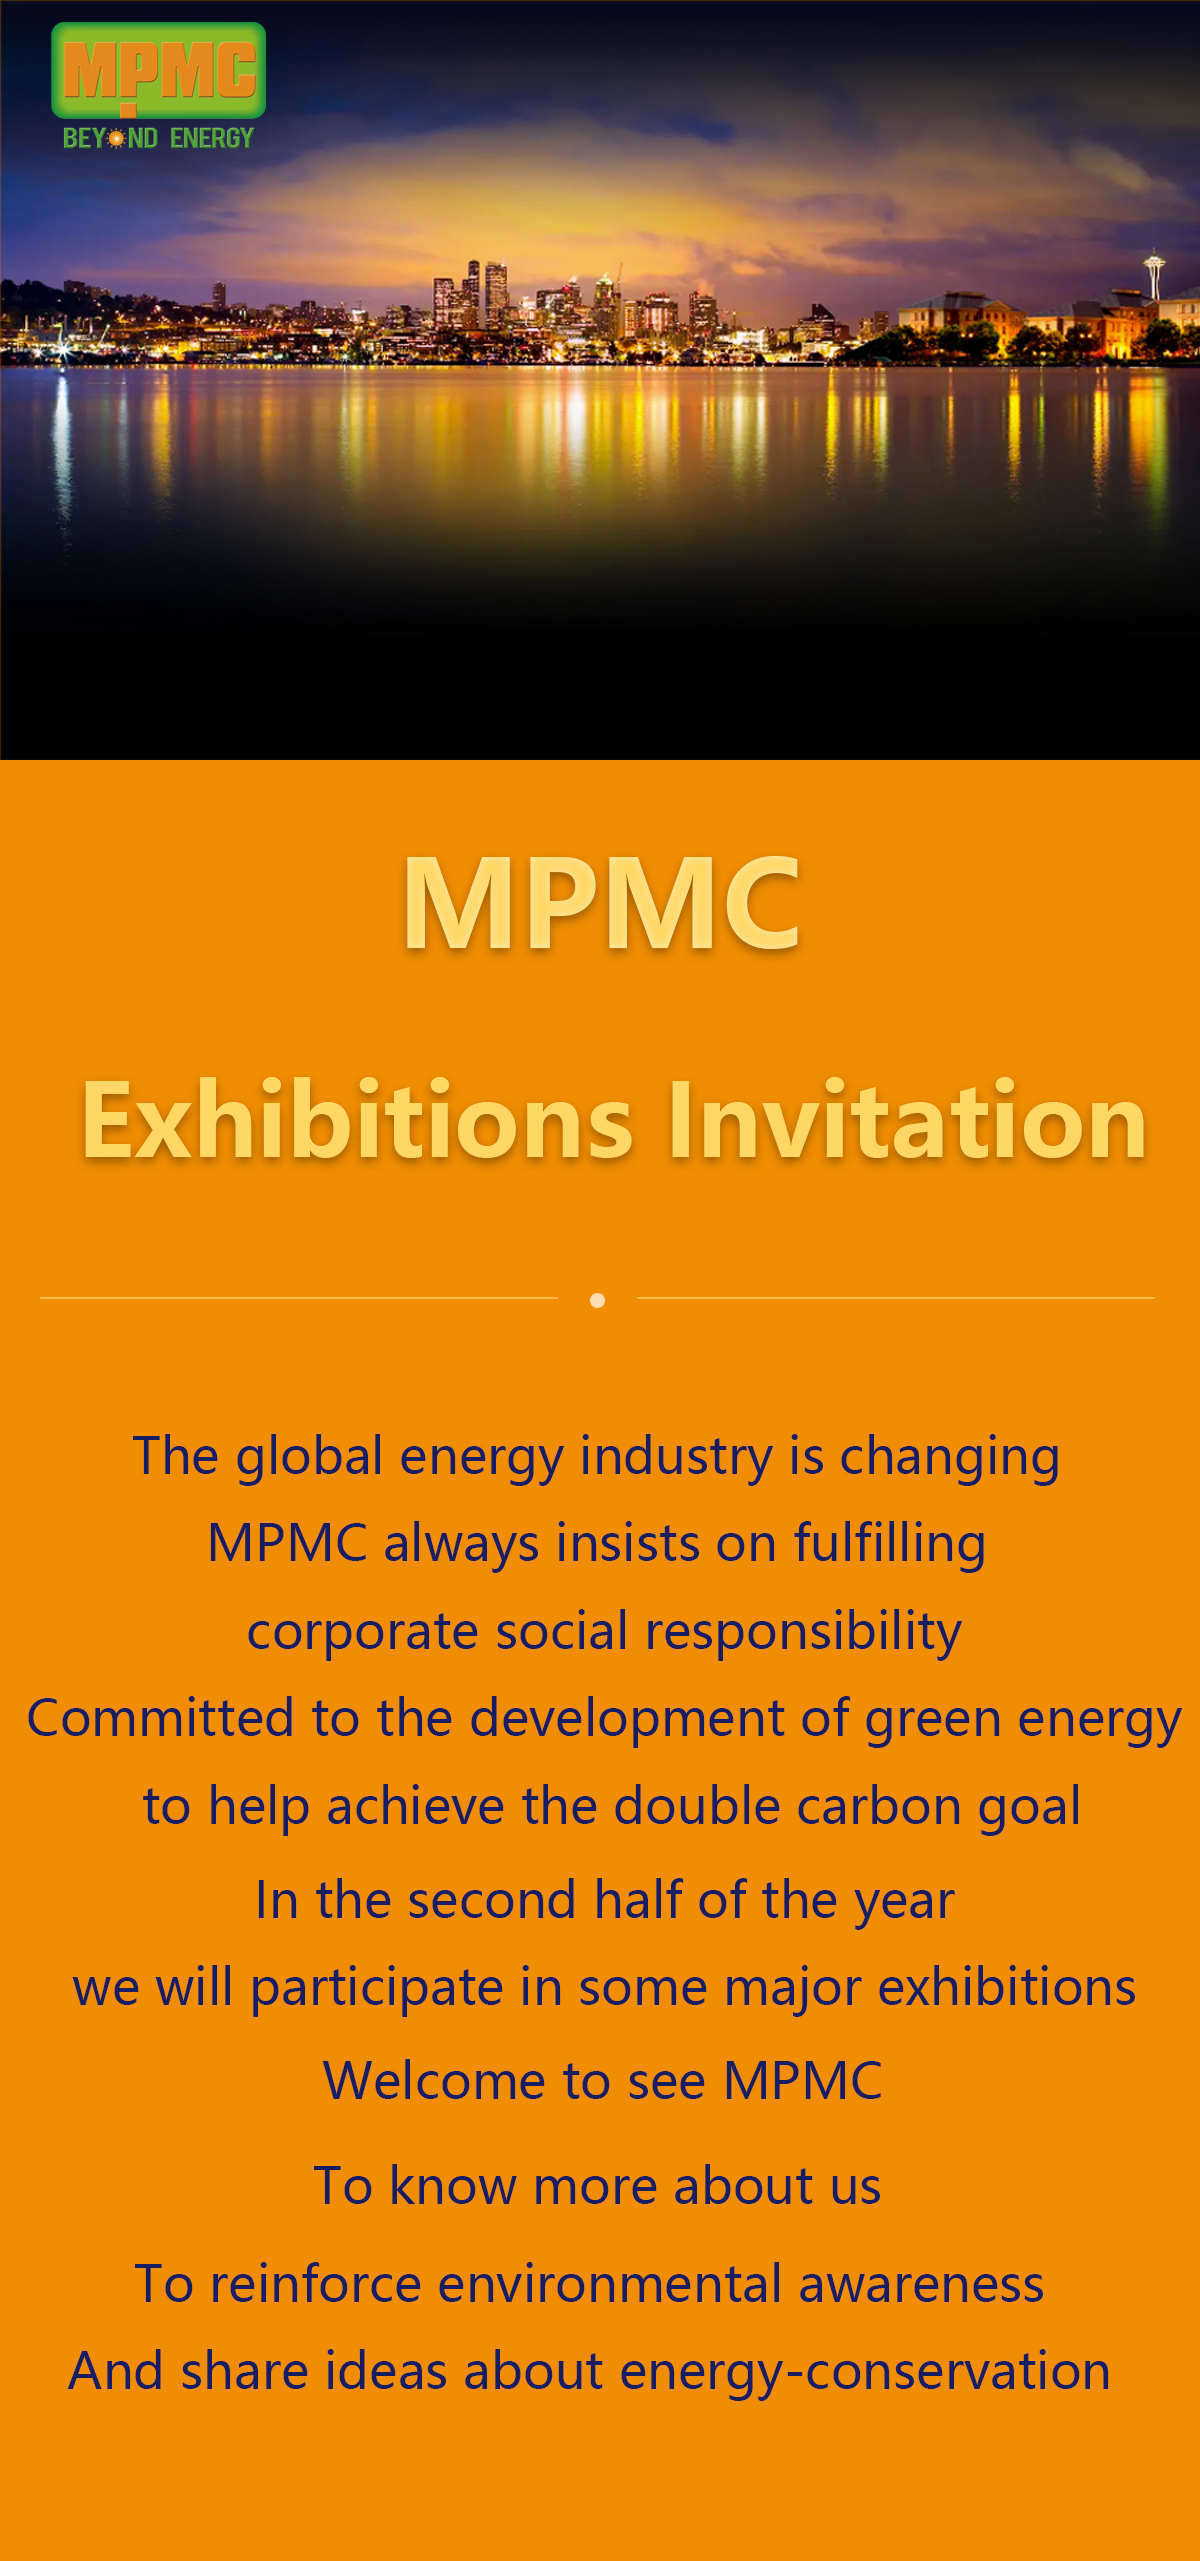 Welcome to see MPMC in major exhibitions in China this year